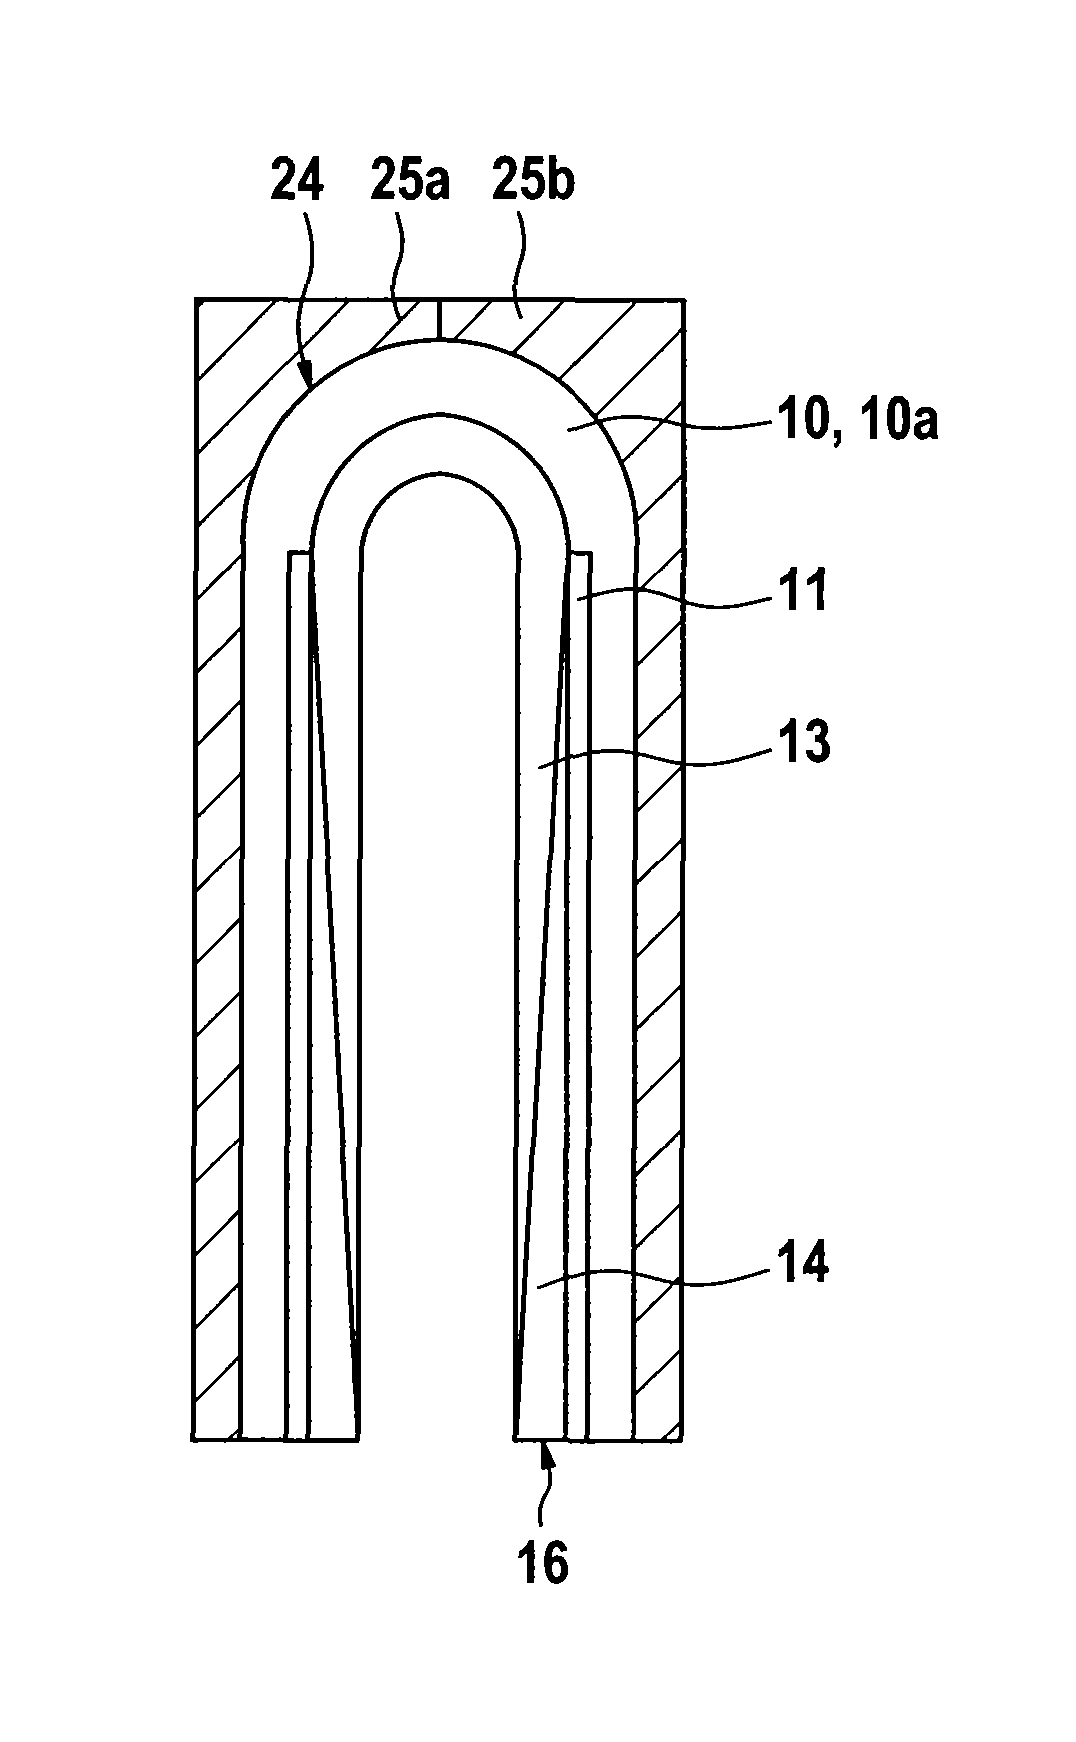 Method for production of a solid oxide fuel cell (SOFC)